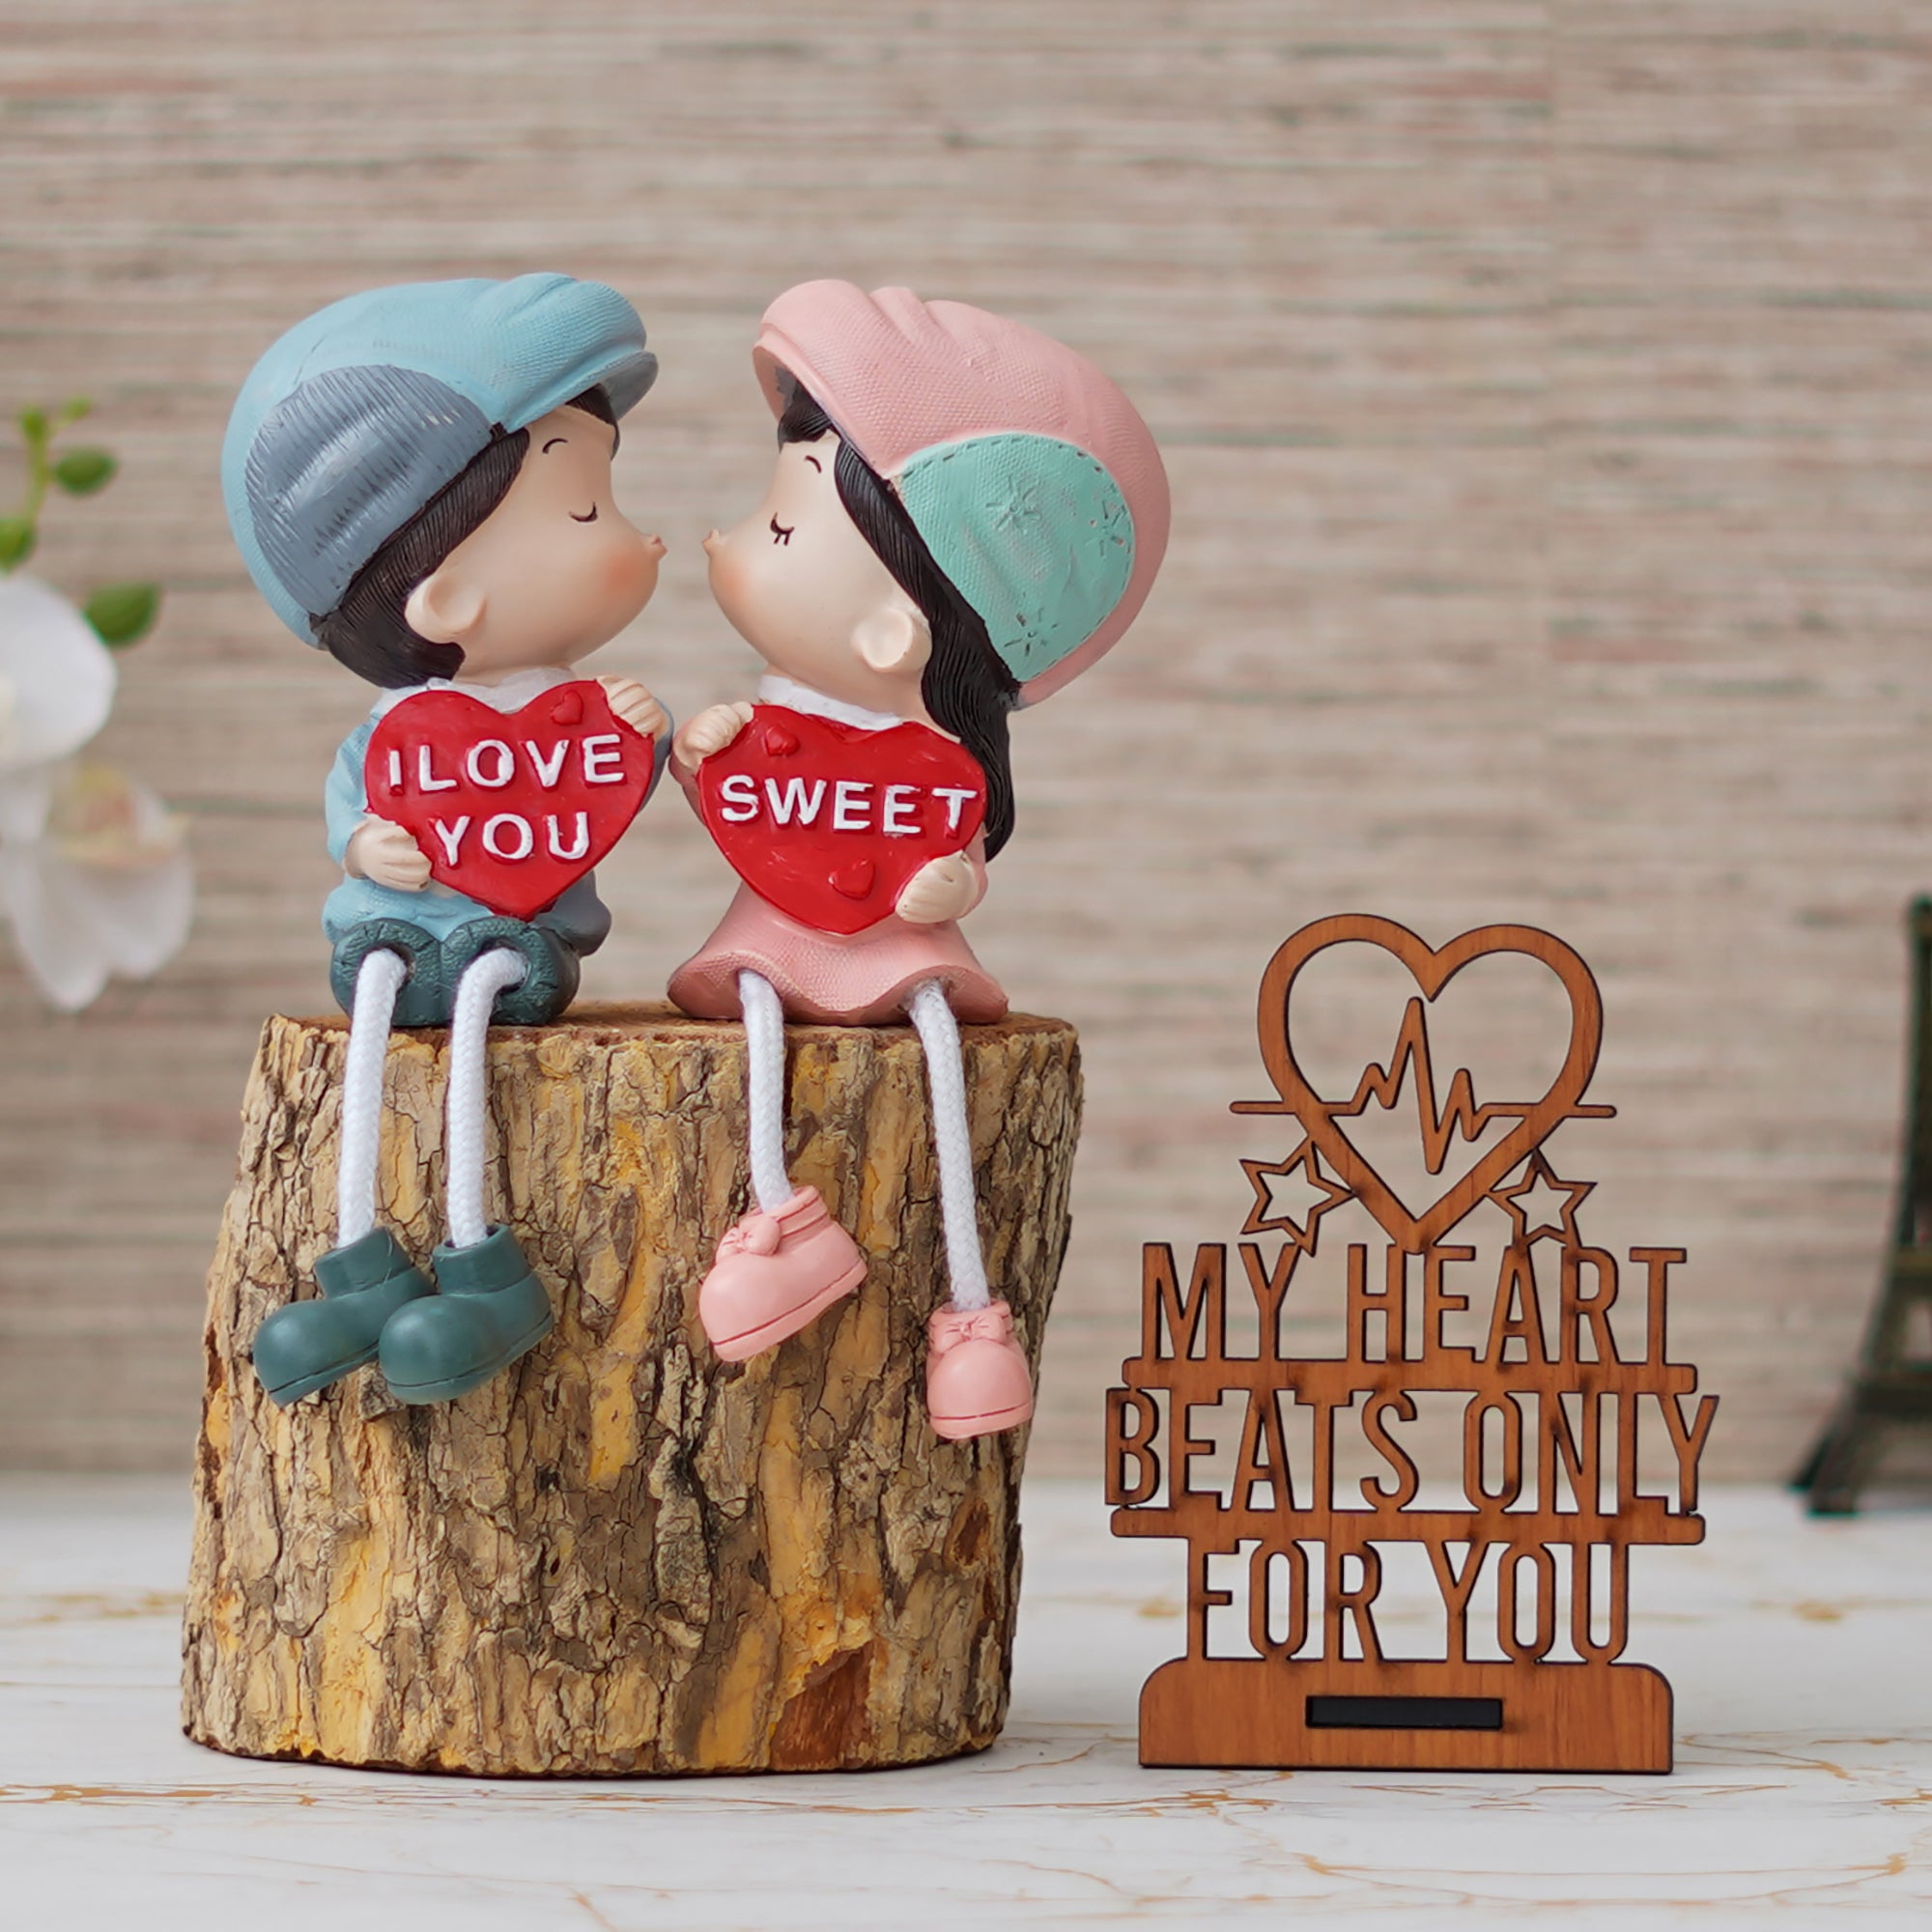 Valentine Combo of "My Heart Beats Only For You" Wooden Showpiece With Stand, Colorful Girl and Boy "Sweet I Love You" Kissing Figurine